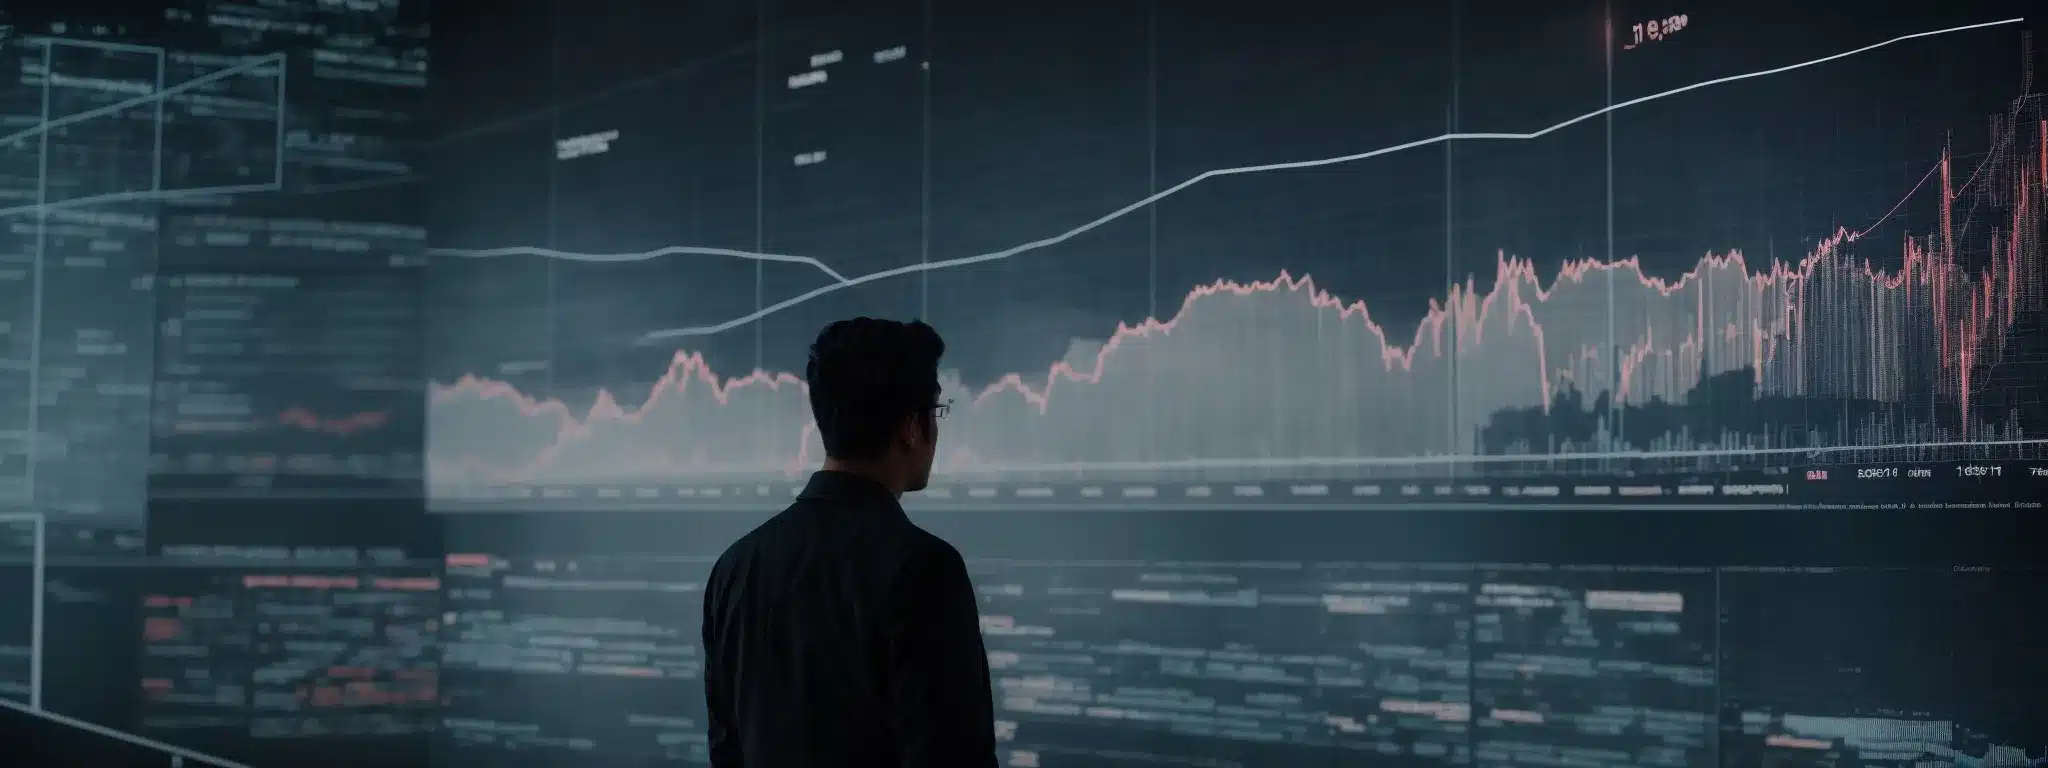 A Person Surrounded By Graphs And Analytics On A Digital Screen, Immersed In Strategic Planning.